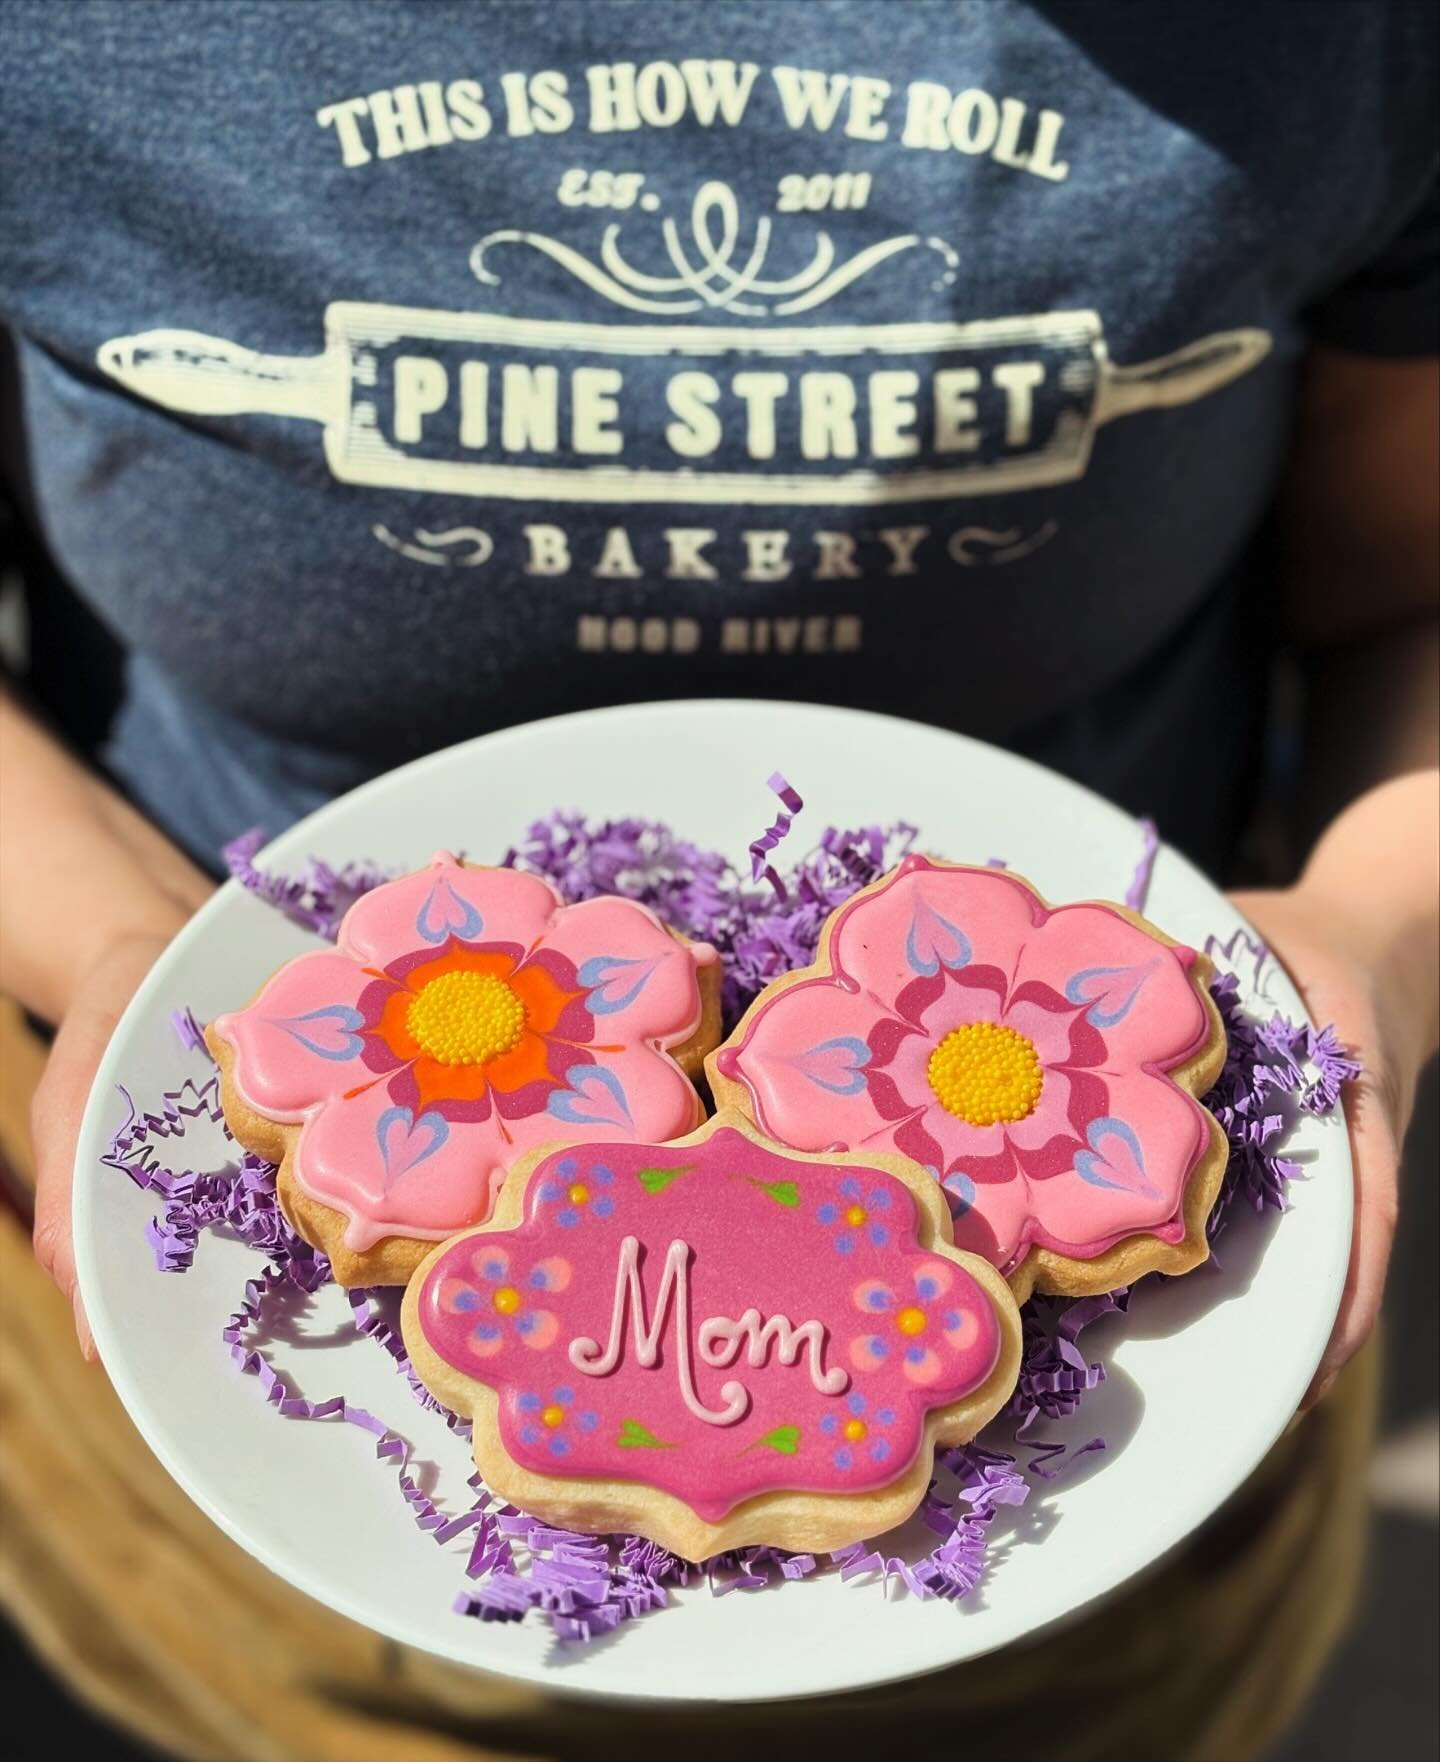 Celebrate the momma&rsquo;s this Sunday with some gorgeous handmade shortbread cookies made by our talented pastry chef, Cadia.💜

#mothersday #mother #mom #momma #mommy #celebrate #bakery #bakeries #cafe #coffeeshop #decoratedcookies #cookiedecorati